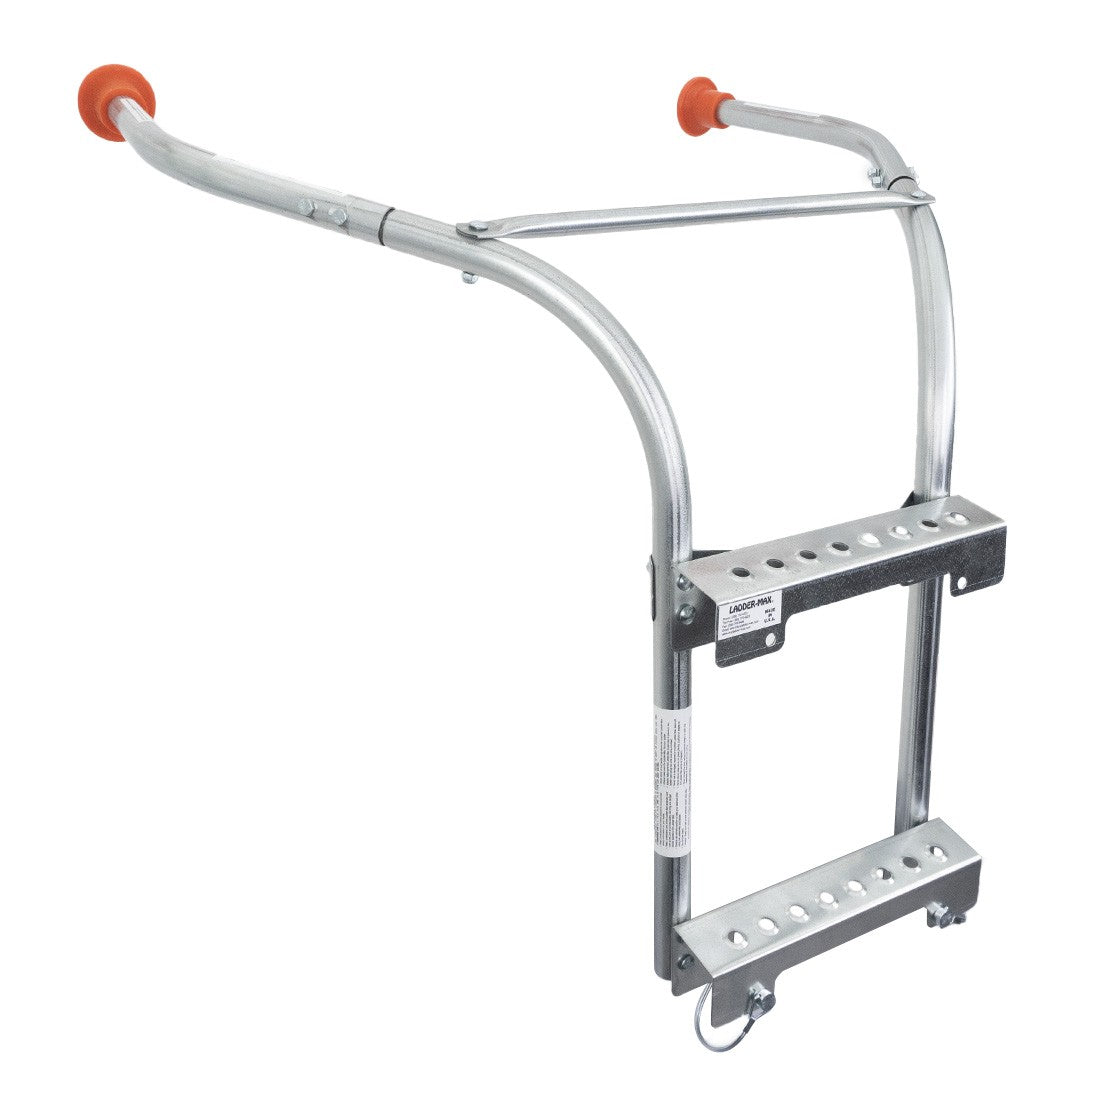 Ladder-Max Multi-Pro Stand-Off Stabilizer Product View